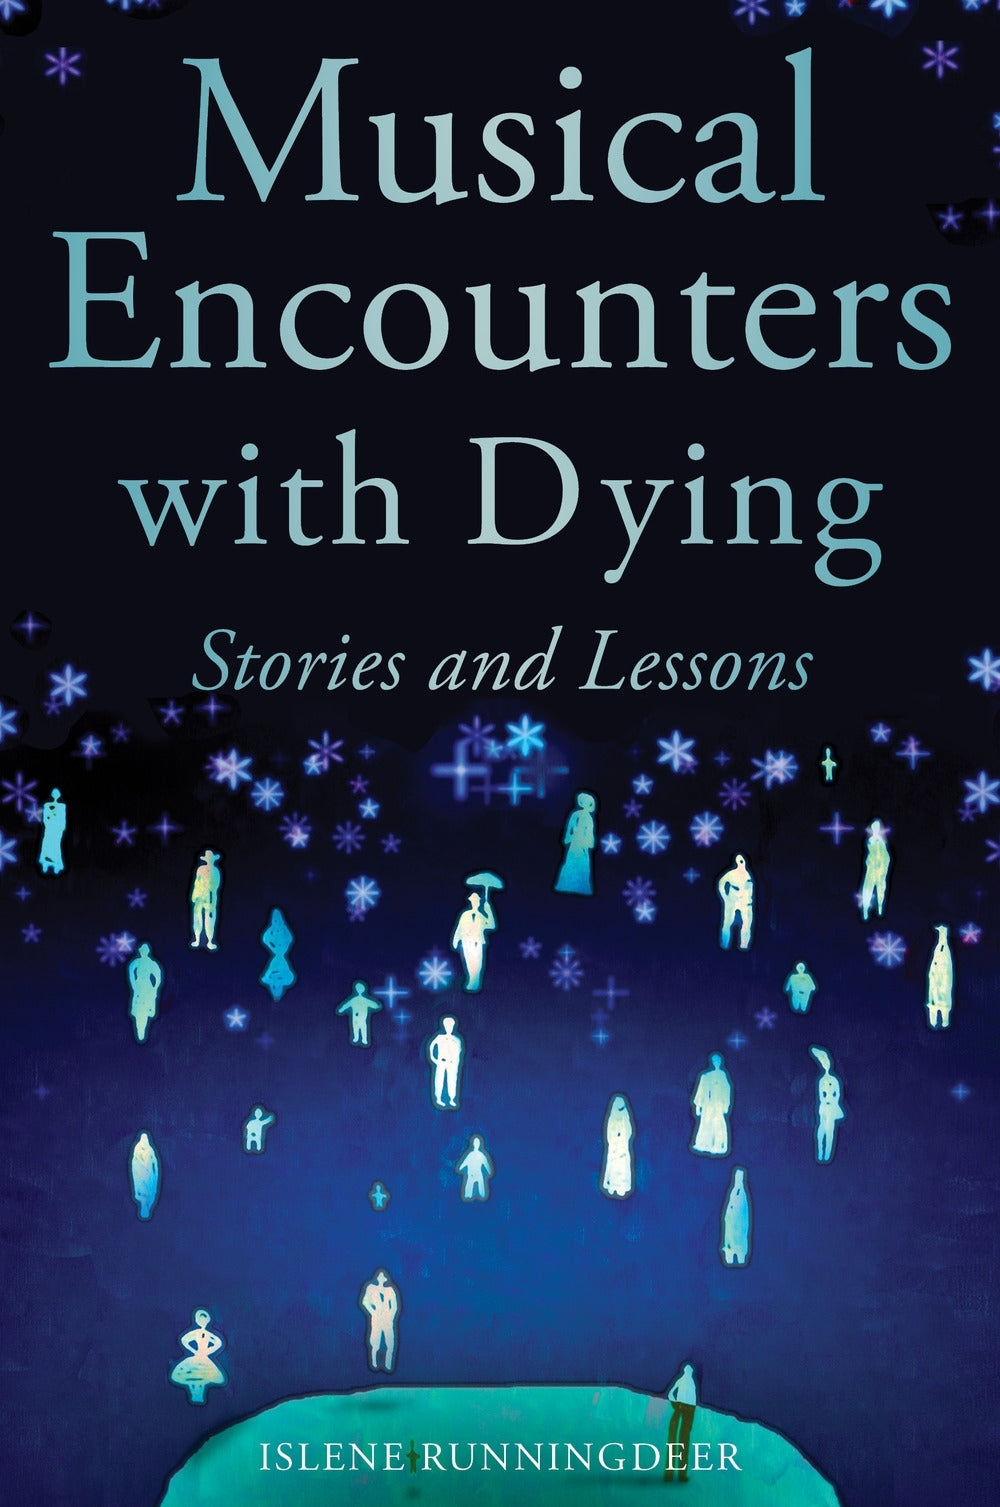 Musical Encounters with Dying by Diana Peirce, Islene Runningdeer